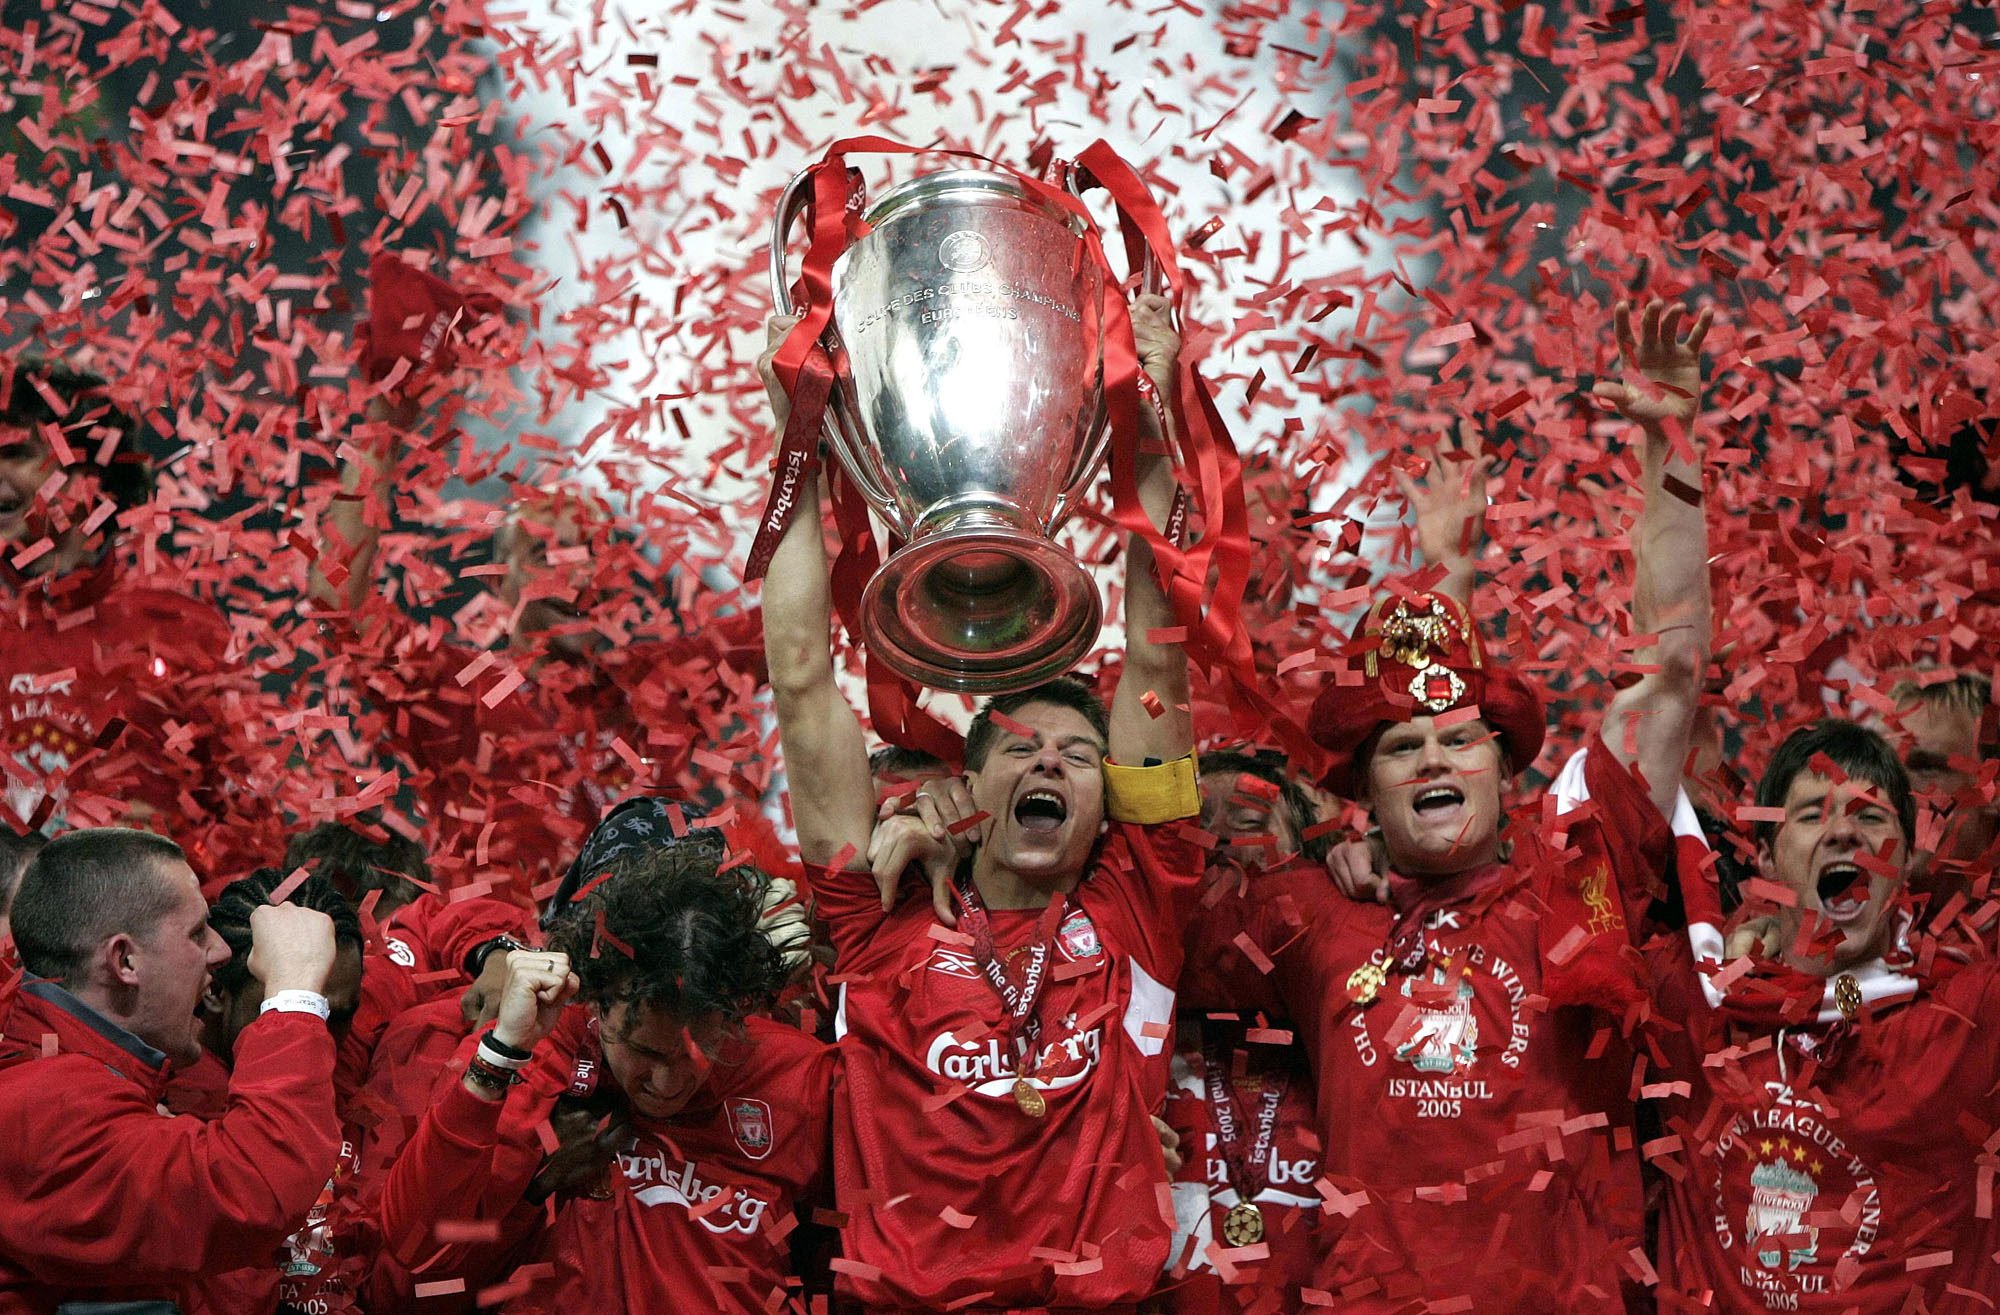 Liverpool beat Milan in the 2005 Uefa Champions League on penalties after an epic contest. Photo: AP